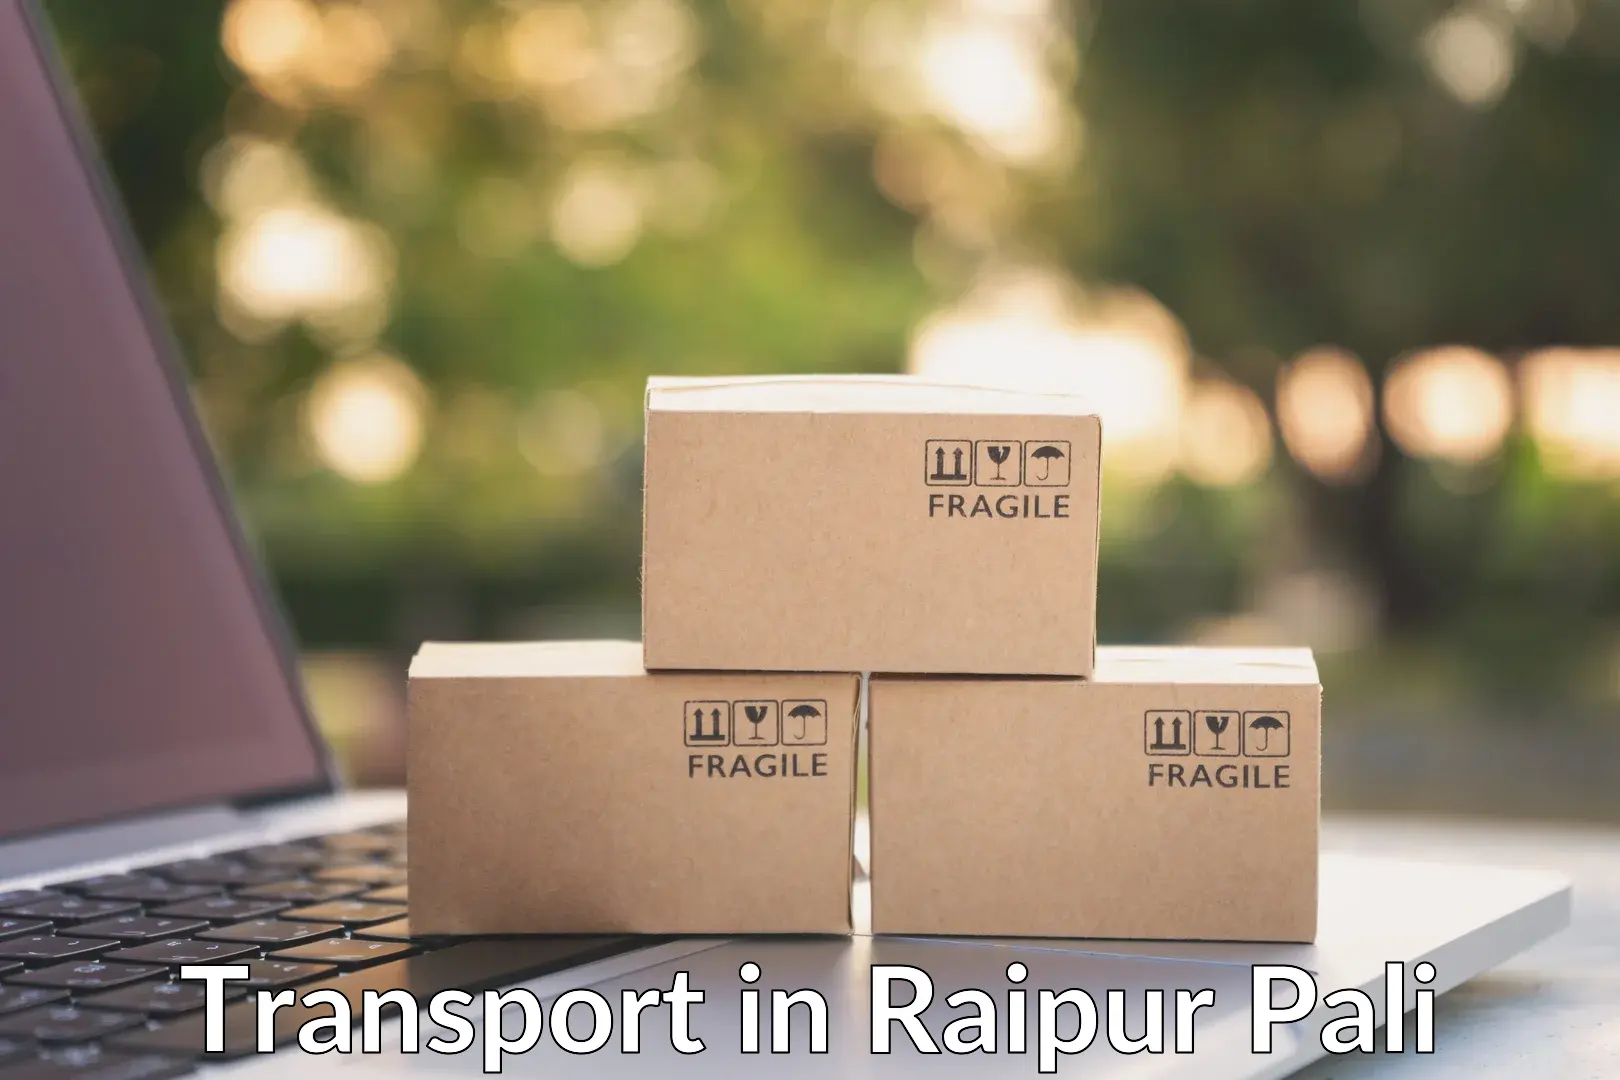 Part load transport service in India in Raipur Pali